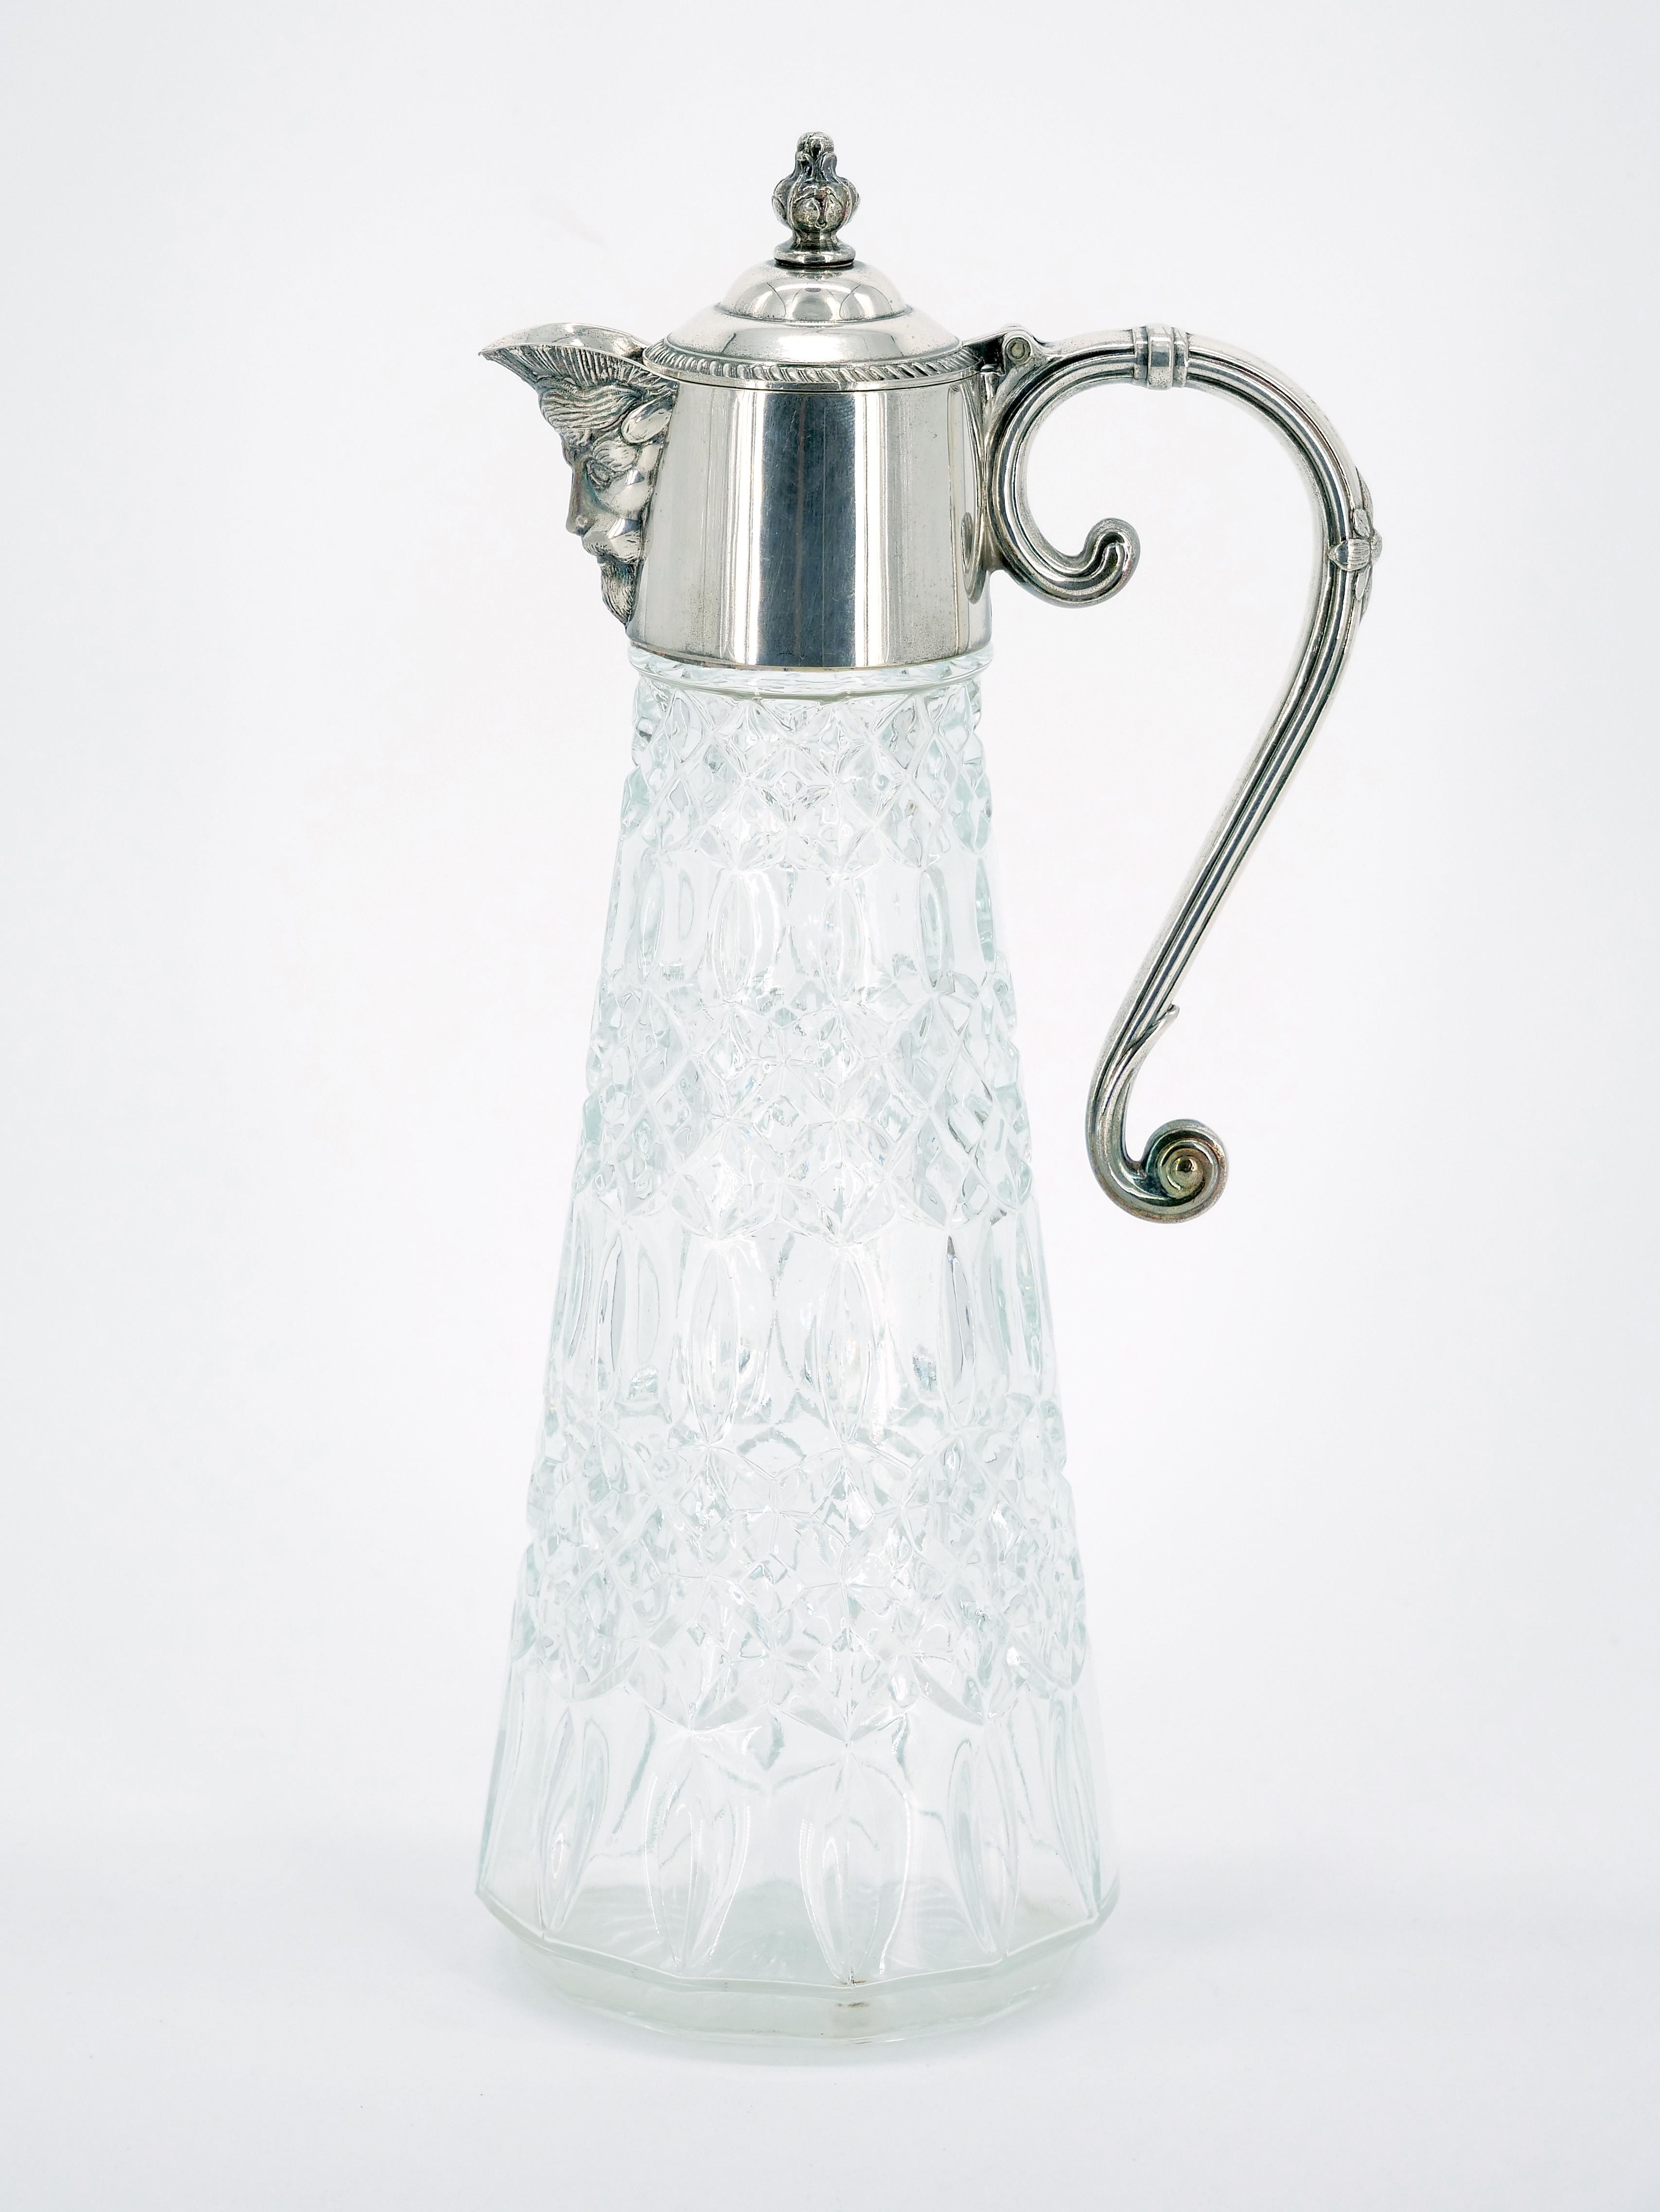 19th Century Silver Plate Holding Top / Cut Glass Claret Jug / Serving Pitcher For Sale 7